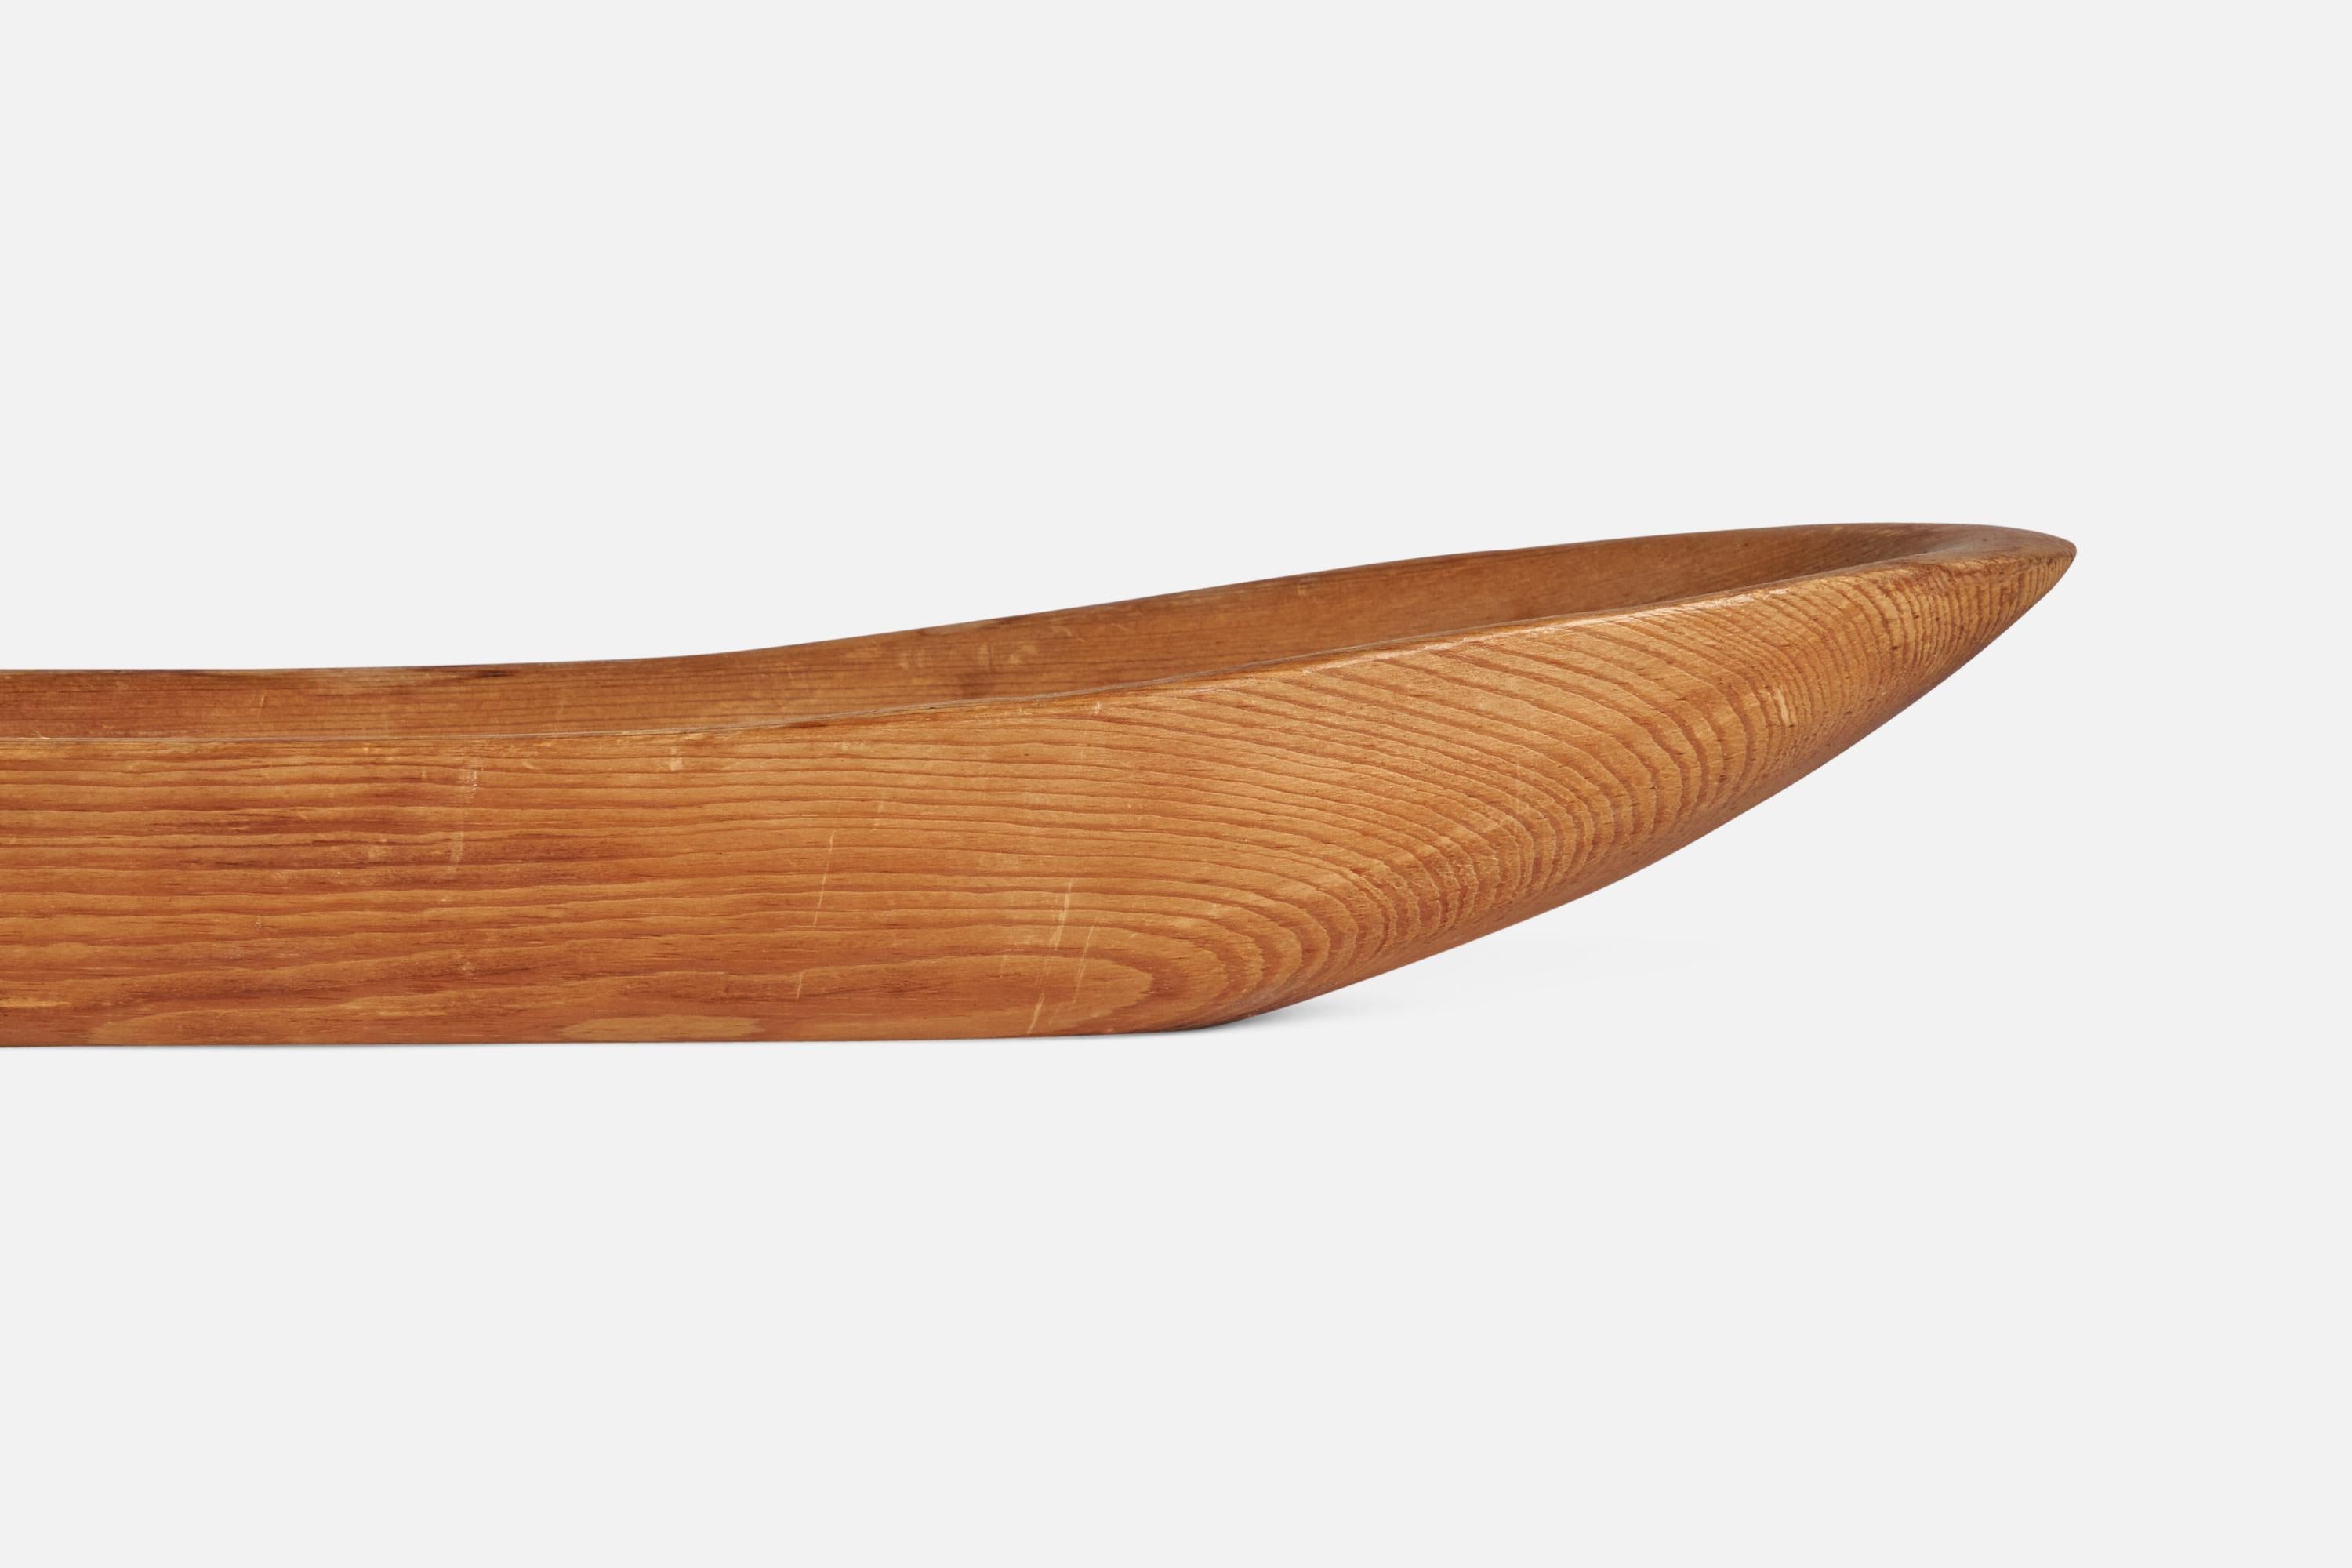 Early 20th Century Swedish Craft, Bowl, Pine, Sweden, c. 1900 For Sale